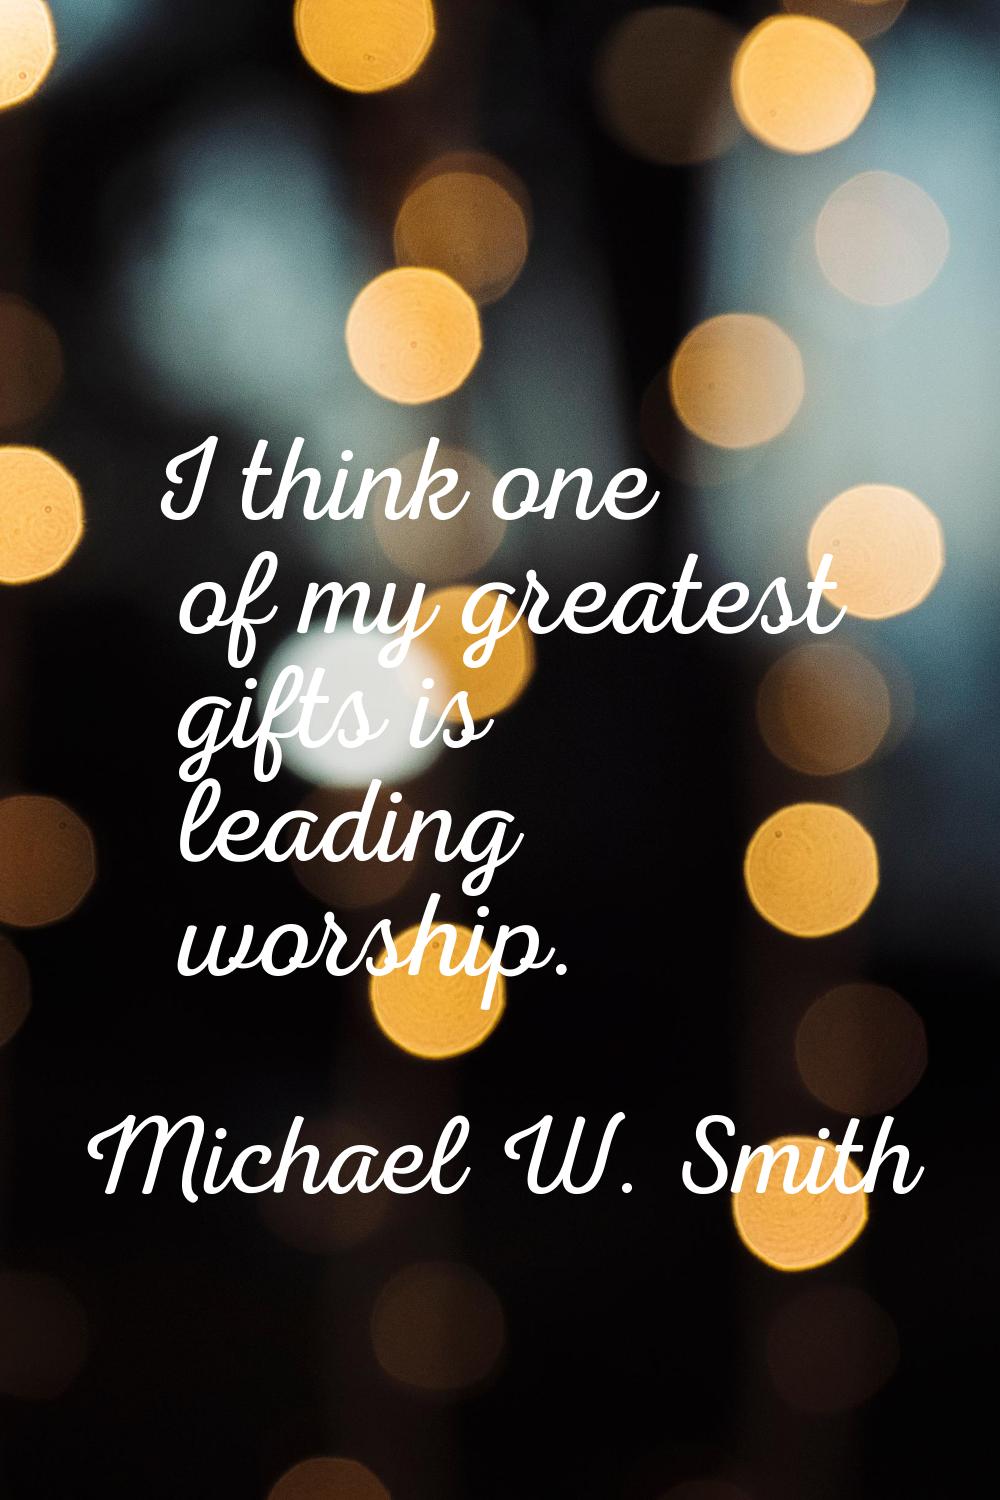 I think one of my greatest gifts is leading worship.